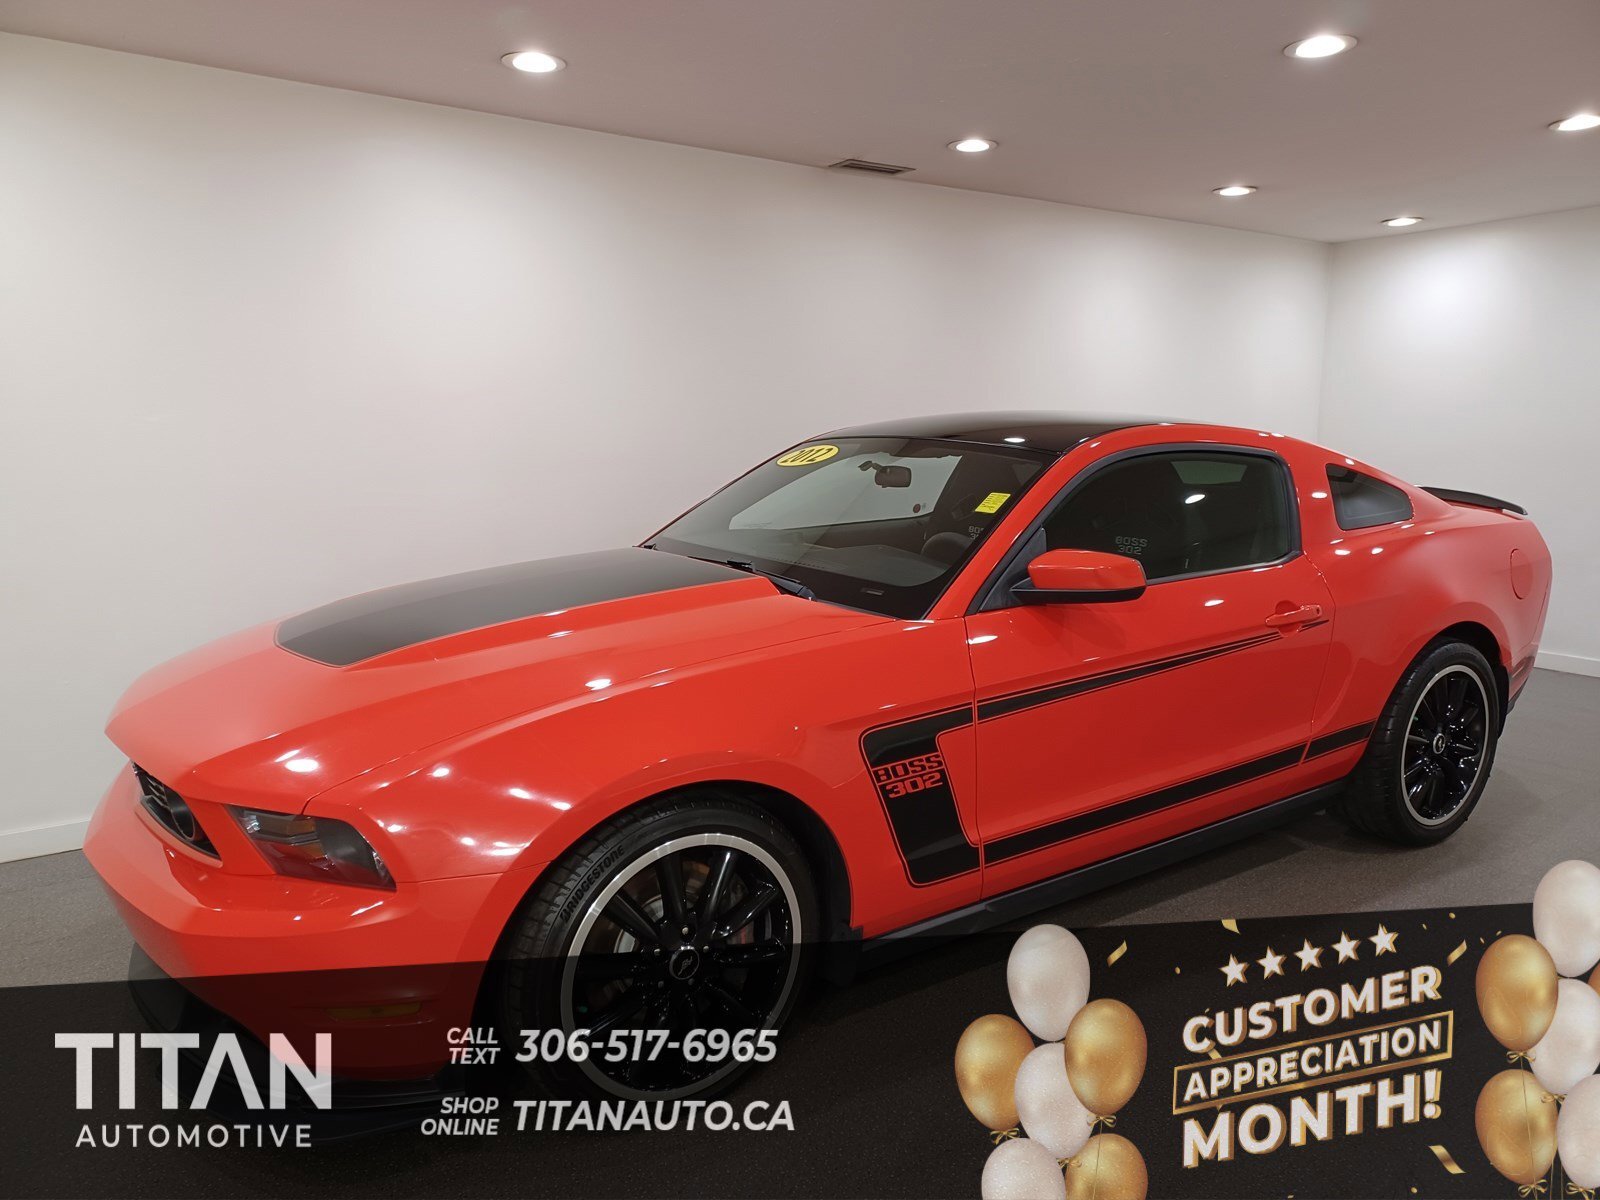 2012 Ford Mustang Boss 302 | 1 of 1135 In Competition Orange | Recar